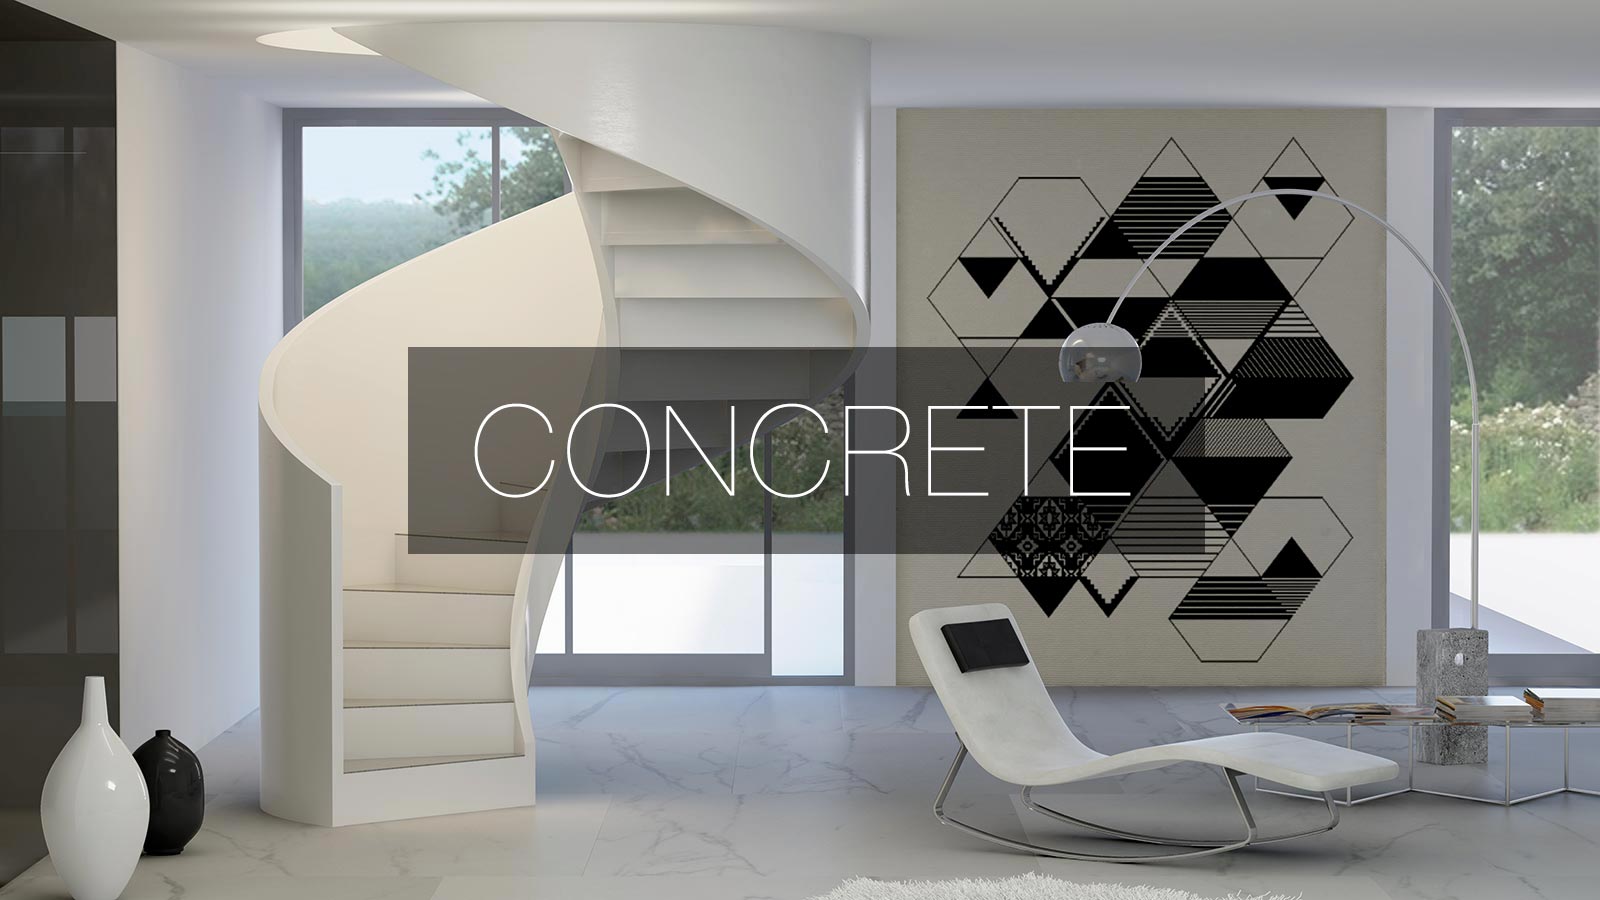 scala-in-cemento-concrete-1-by-executive-stairs